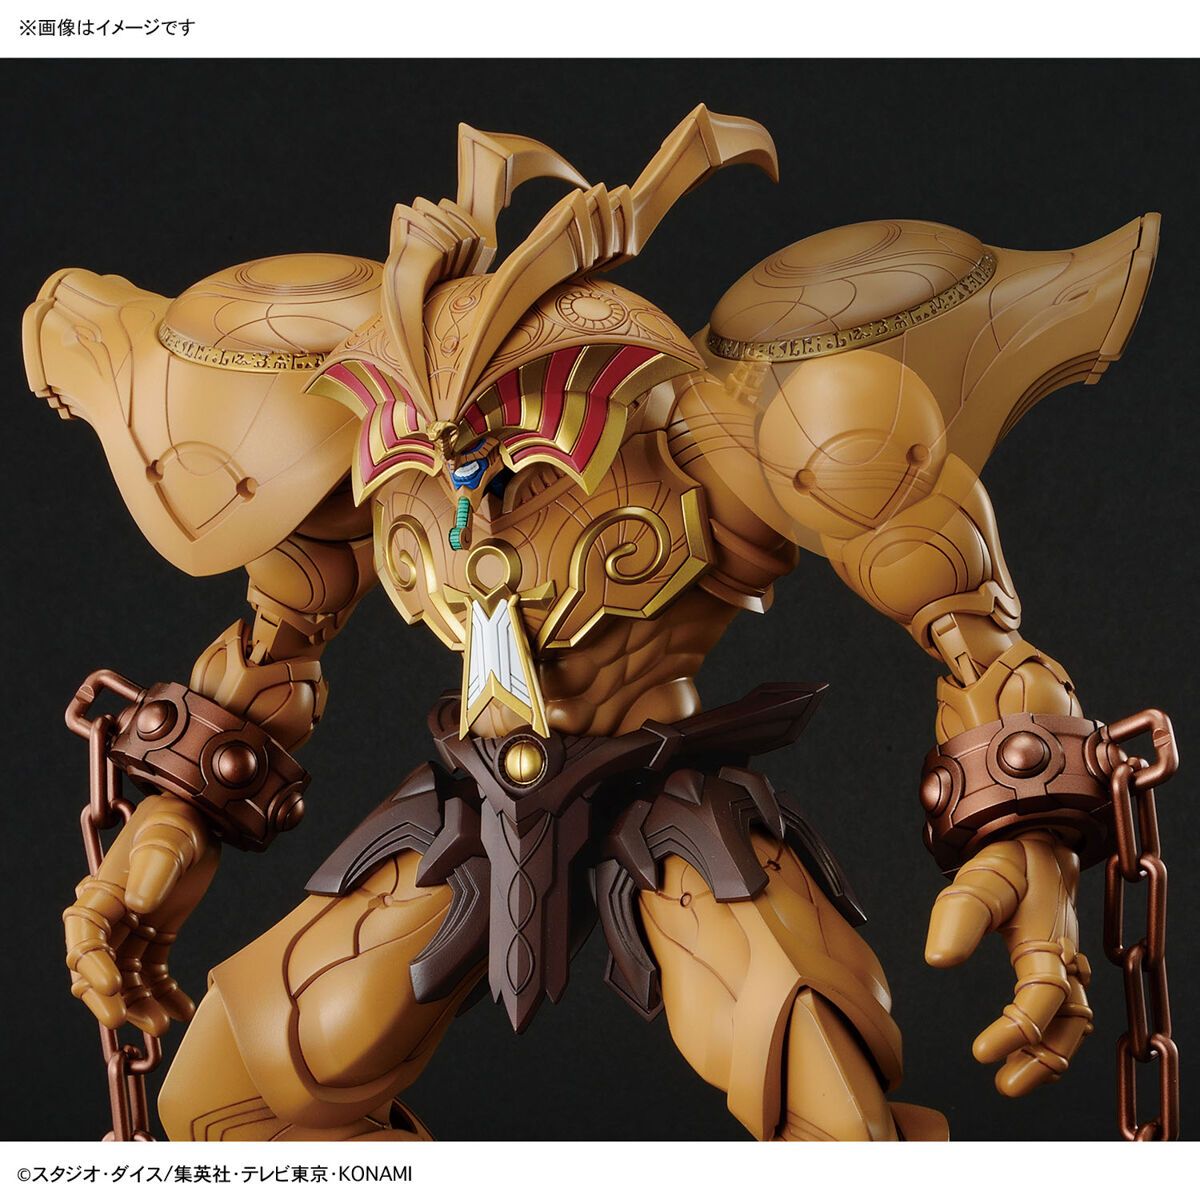 Yu-Gi-Oh! Figure-rise Standard Amplified - The Legendary Exodia Incarnate - PREORDER (Estimated to arrive late August / early September)